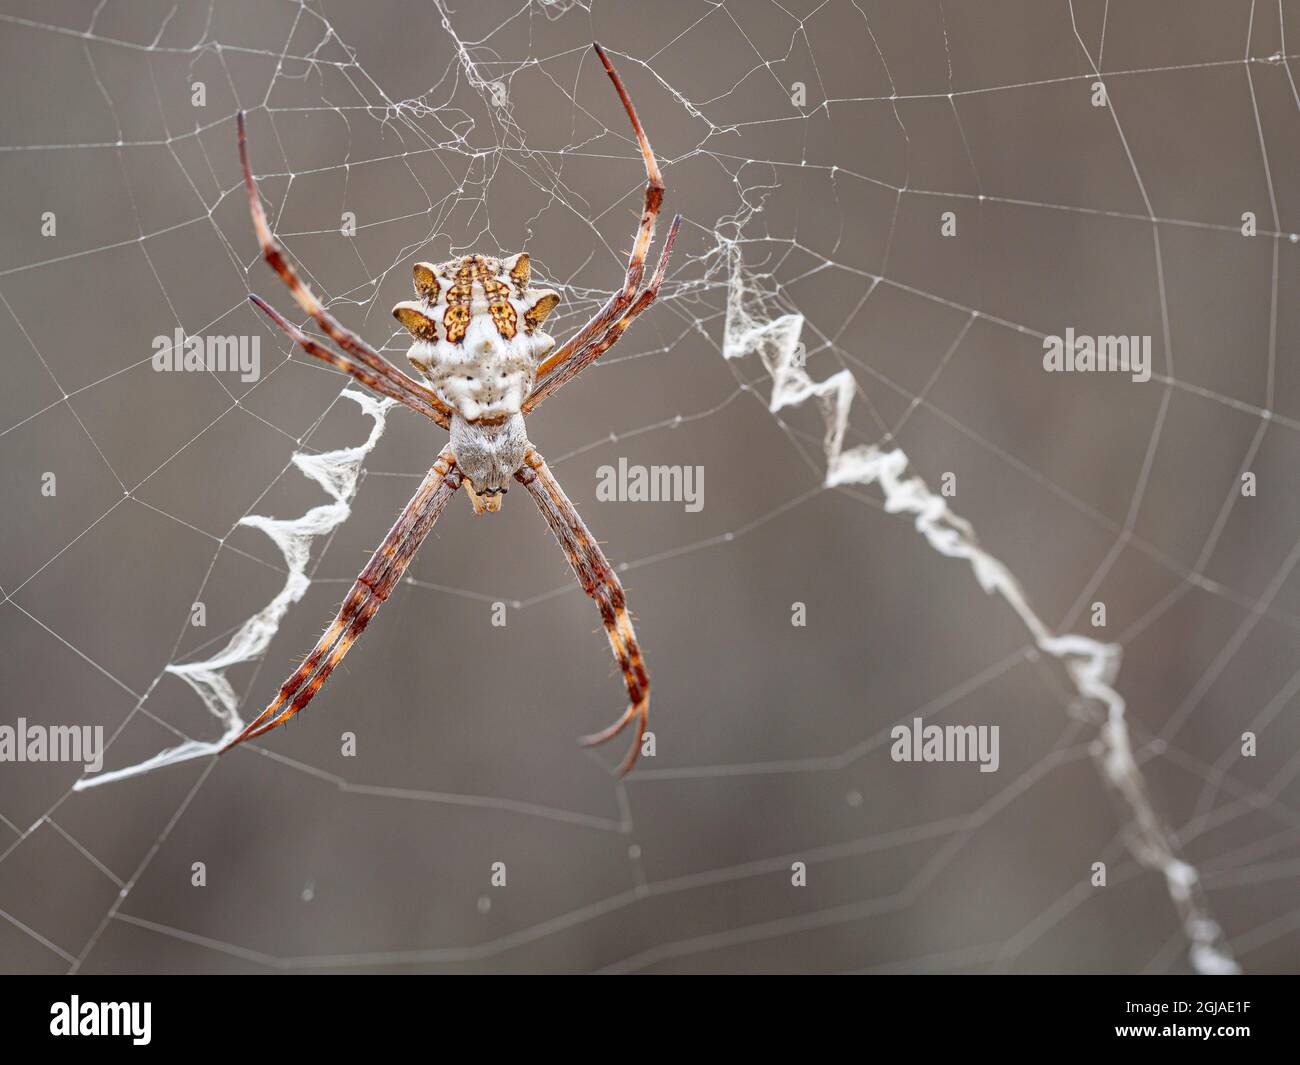 Silver garden spider (argiope, an orbweaver) on web showing stabilimenti and orb web. Stock Photo